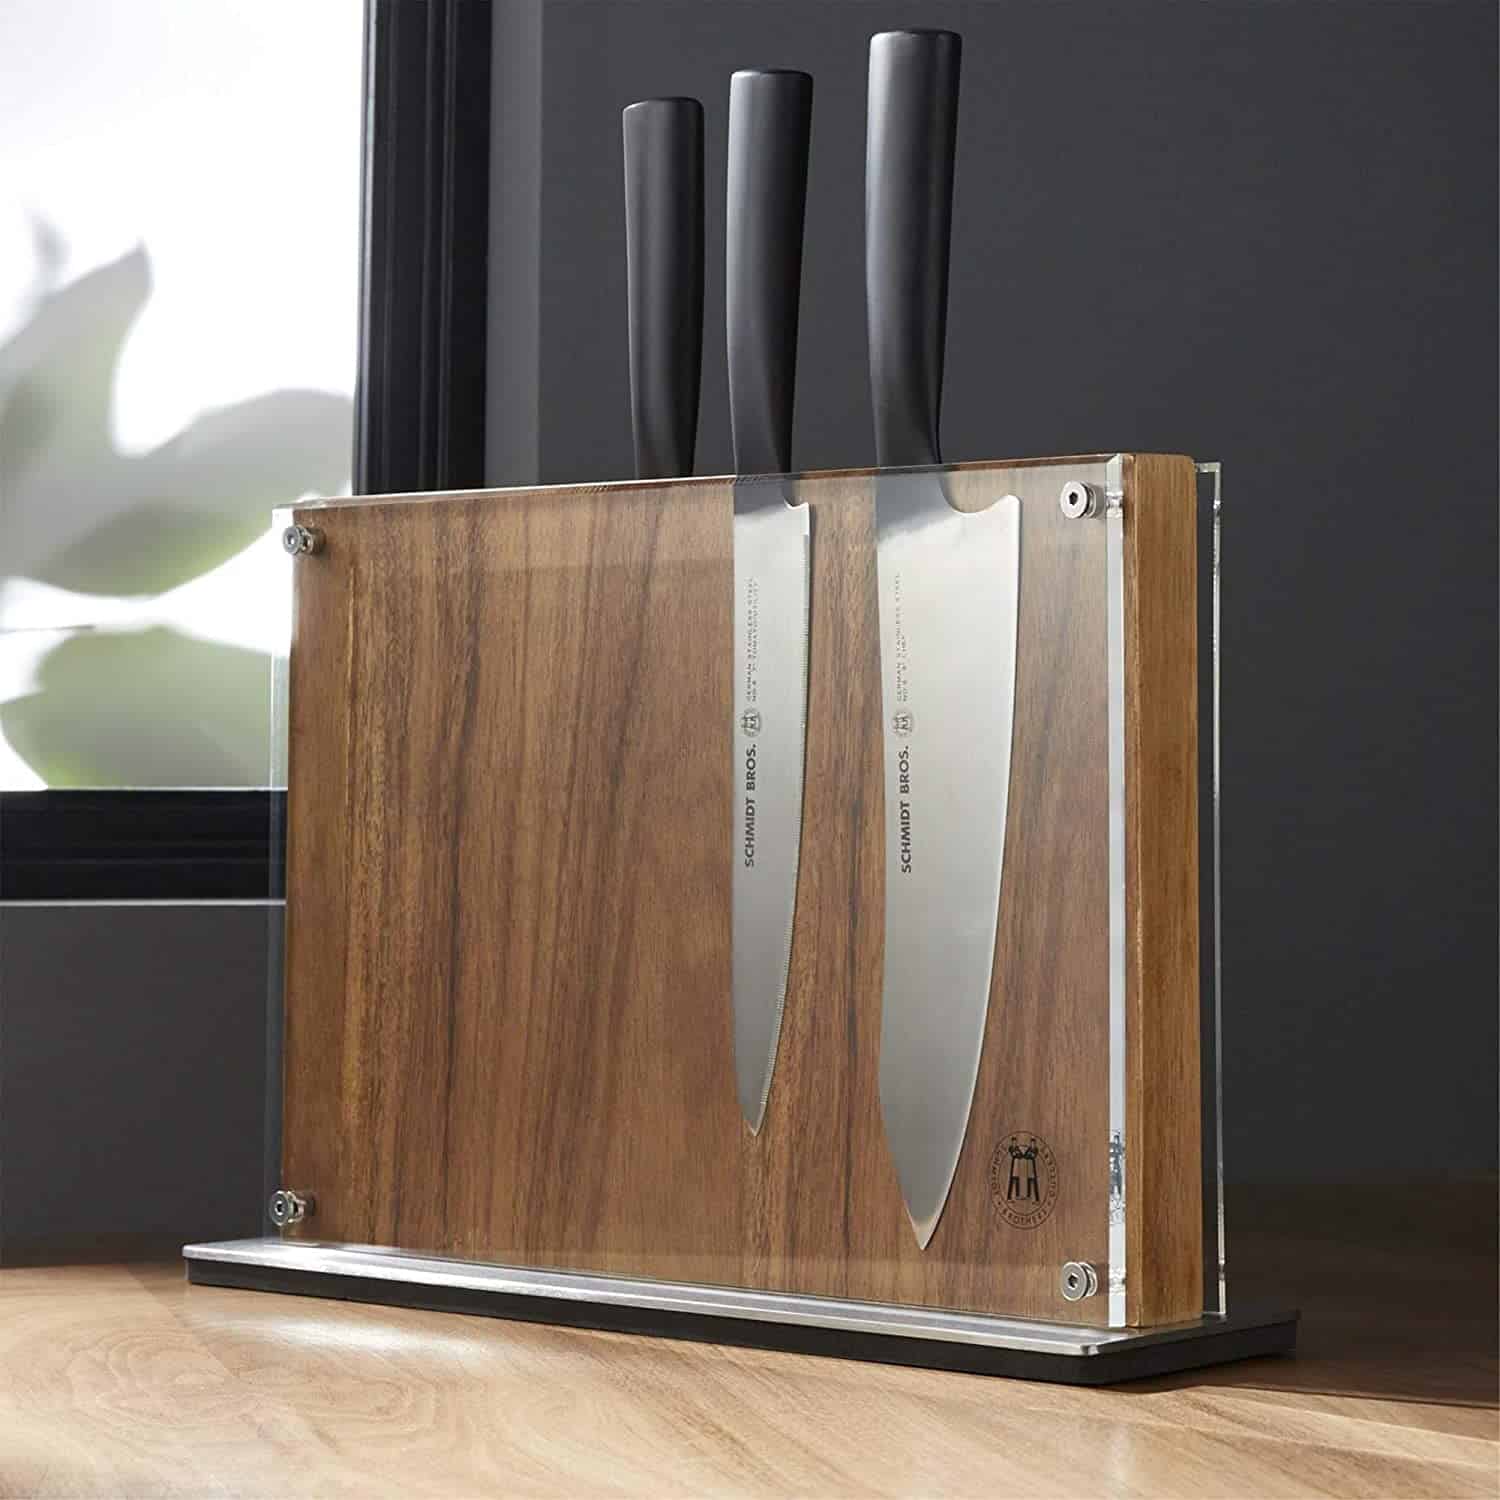 Best magnetic knife block- Schmidt Brothers Acacia Downtown in the kitchen